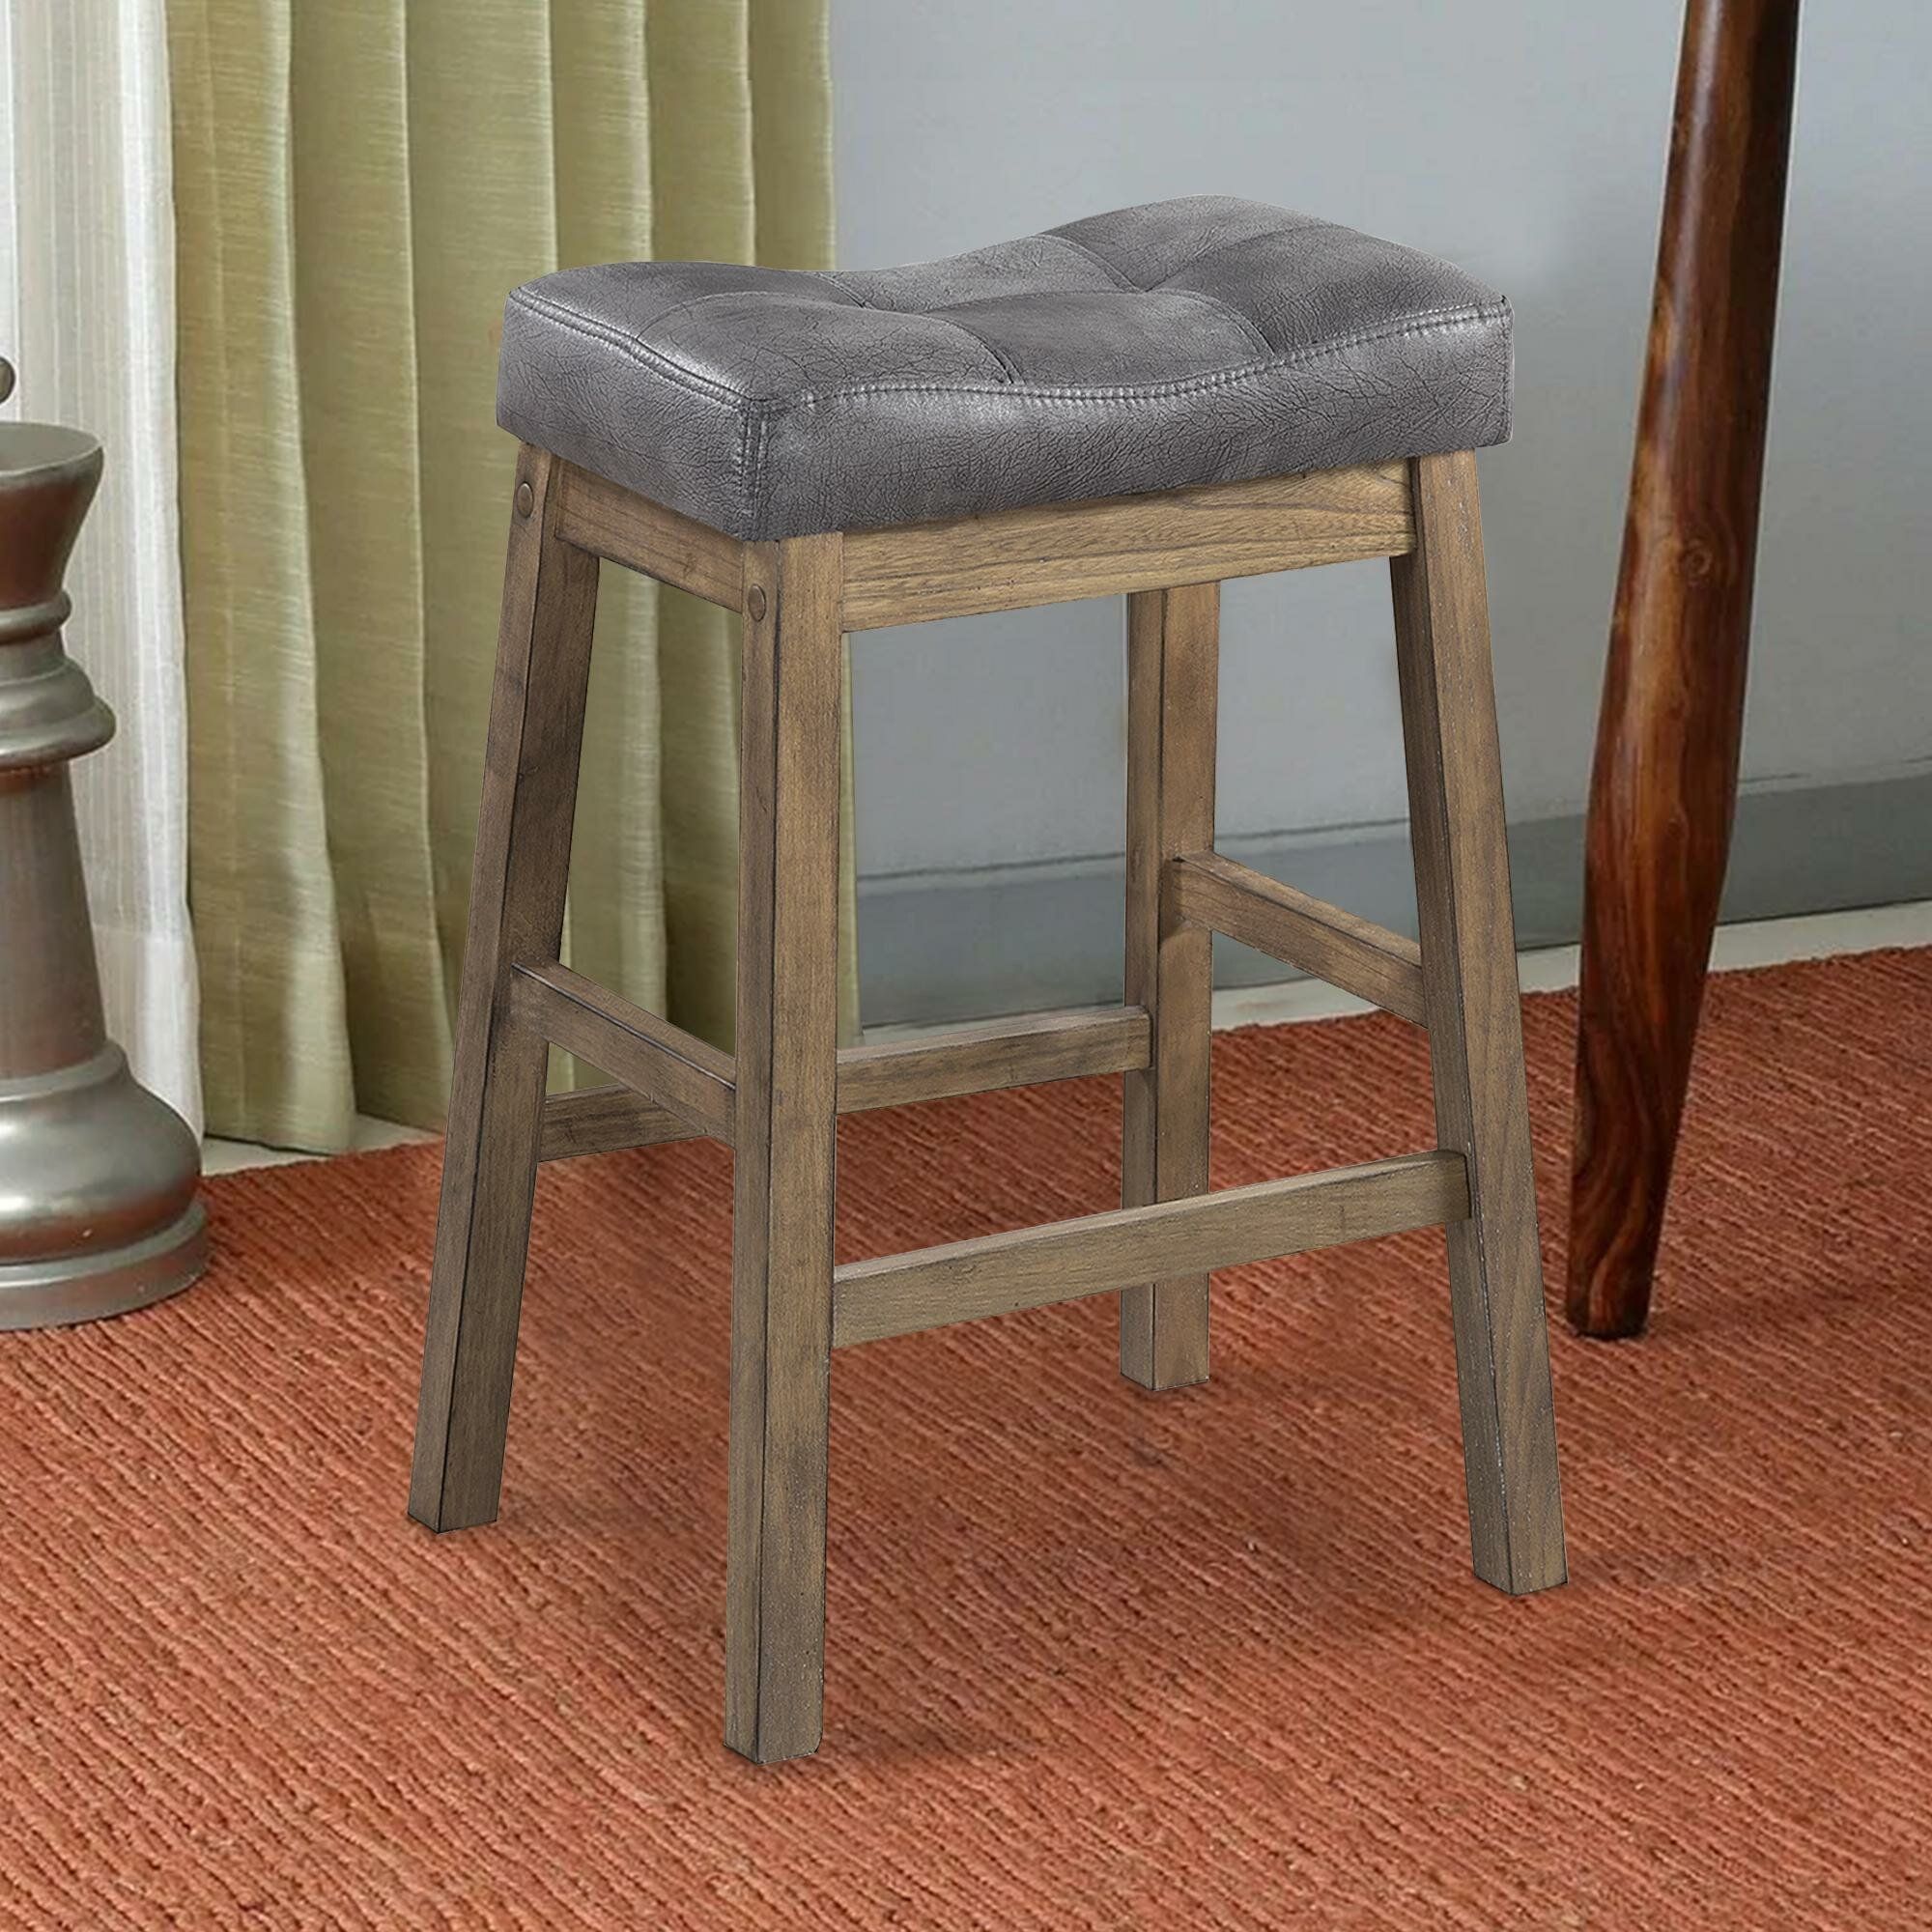 Stanwood Counter & Bar Stool Intended For Standwood Metal Garden Stools (View 2 of 25)